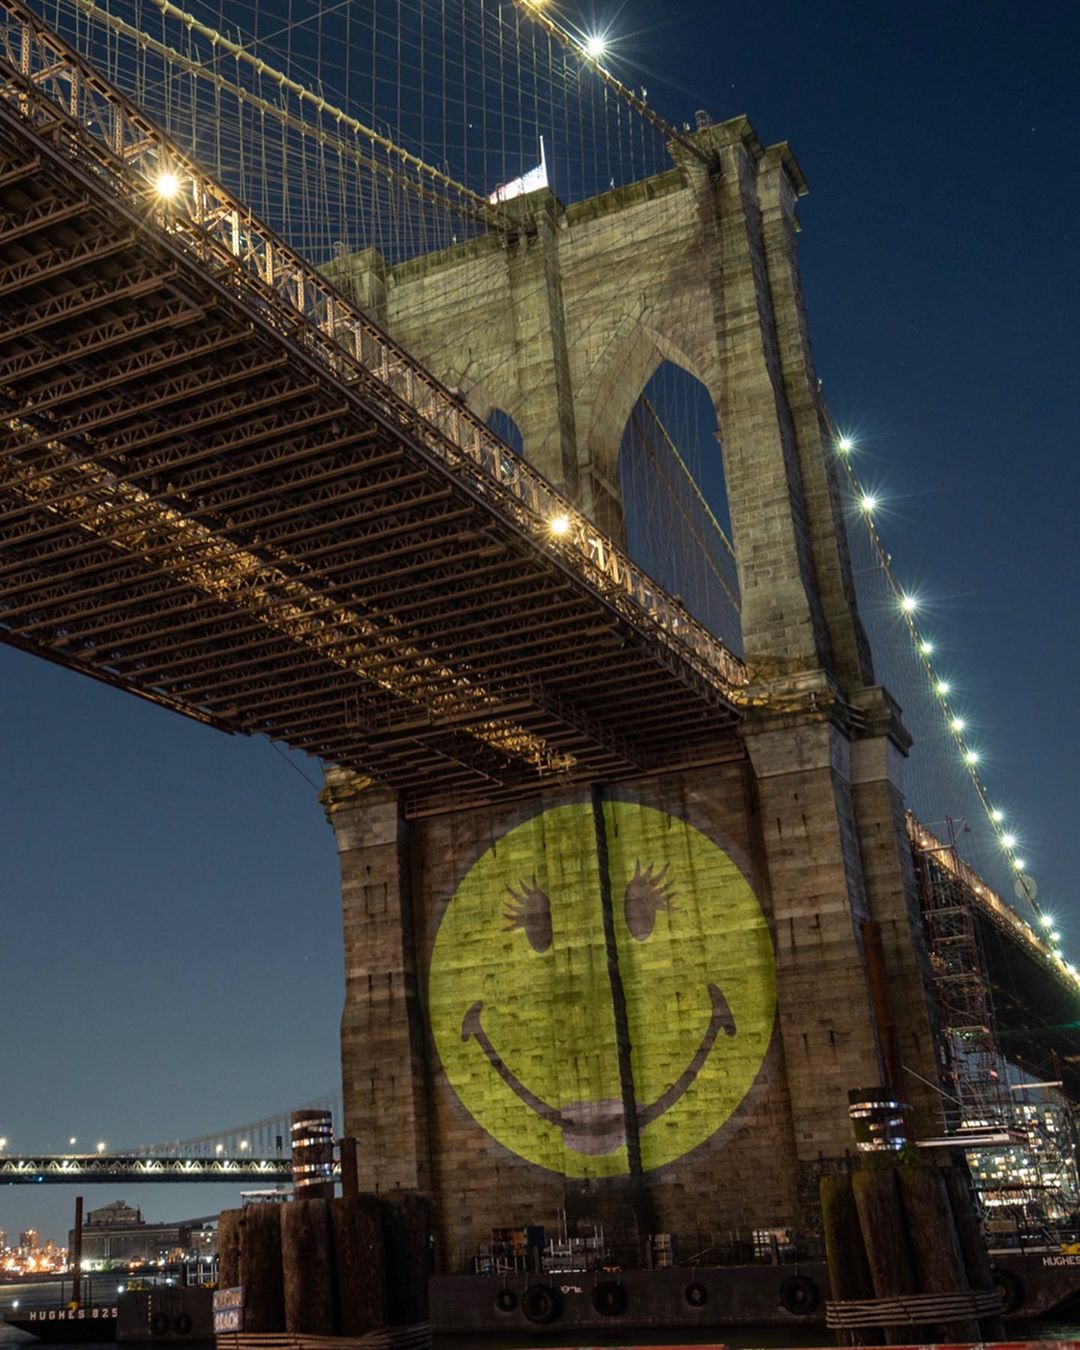 Ciaté London - 👋 #NYC hope you took some time to smile last night 🙂 We brought the smiles from #London to #NewYork’s #brooklynbridge 🌉

As with our London projection (on July 16th) we wanted to remin...